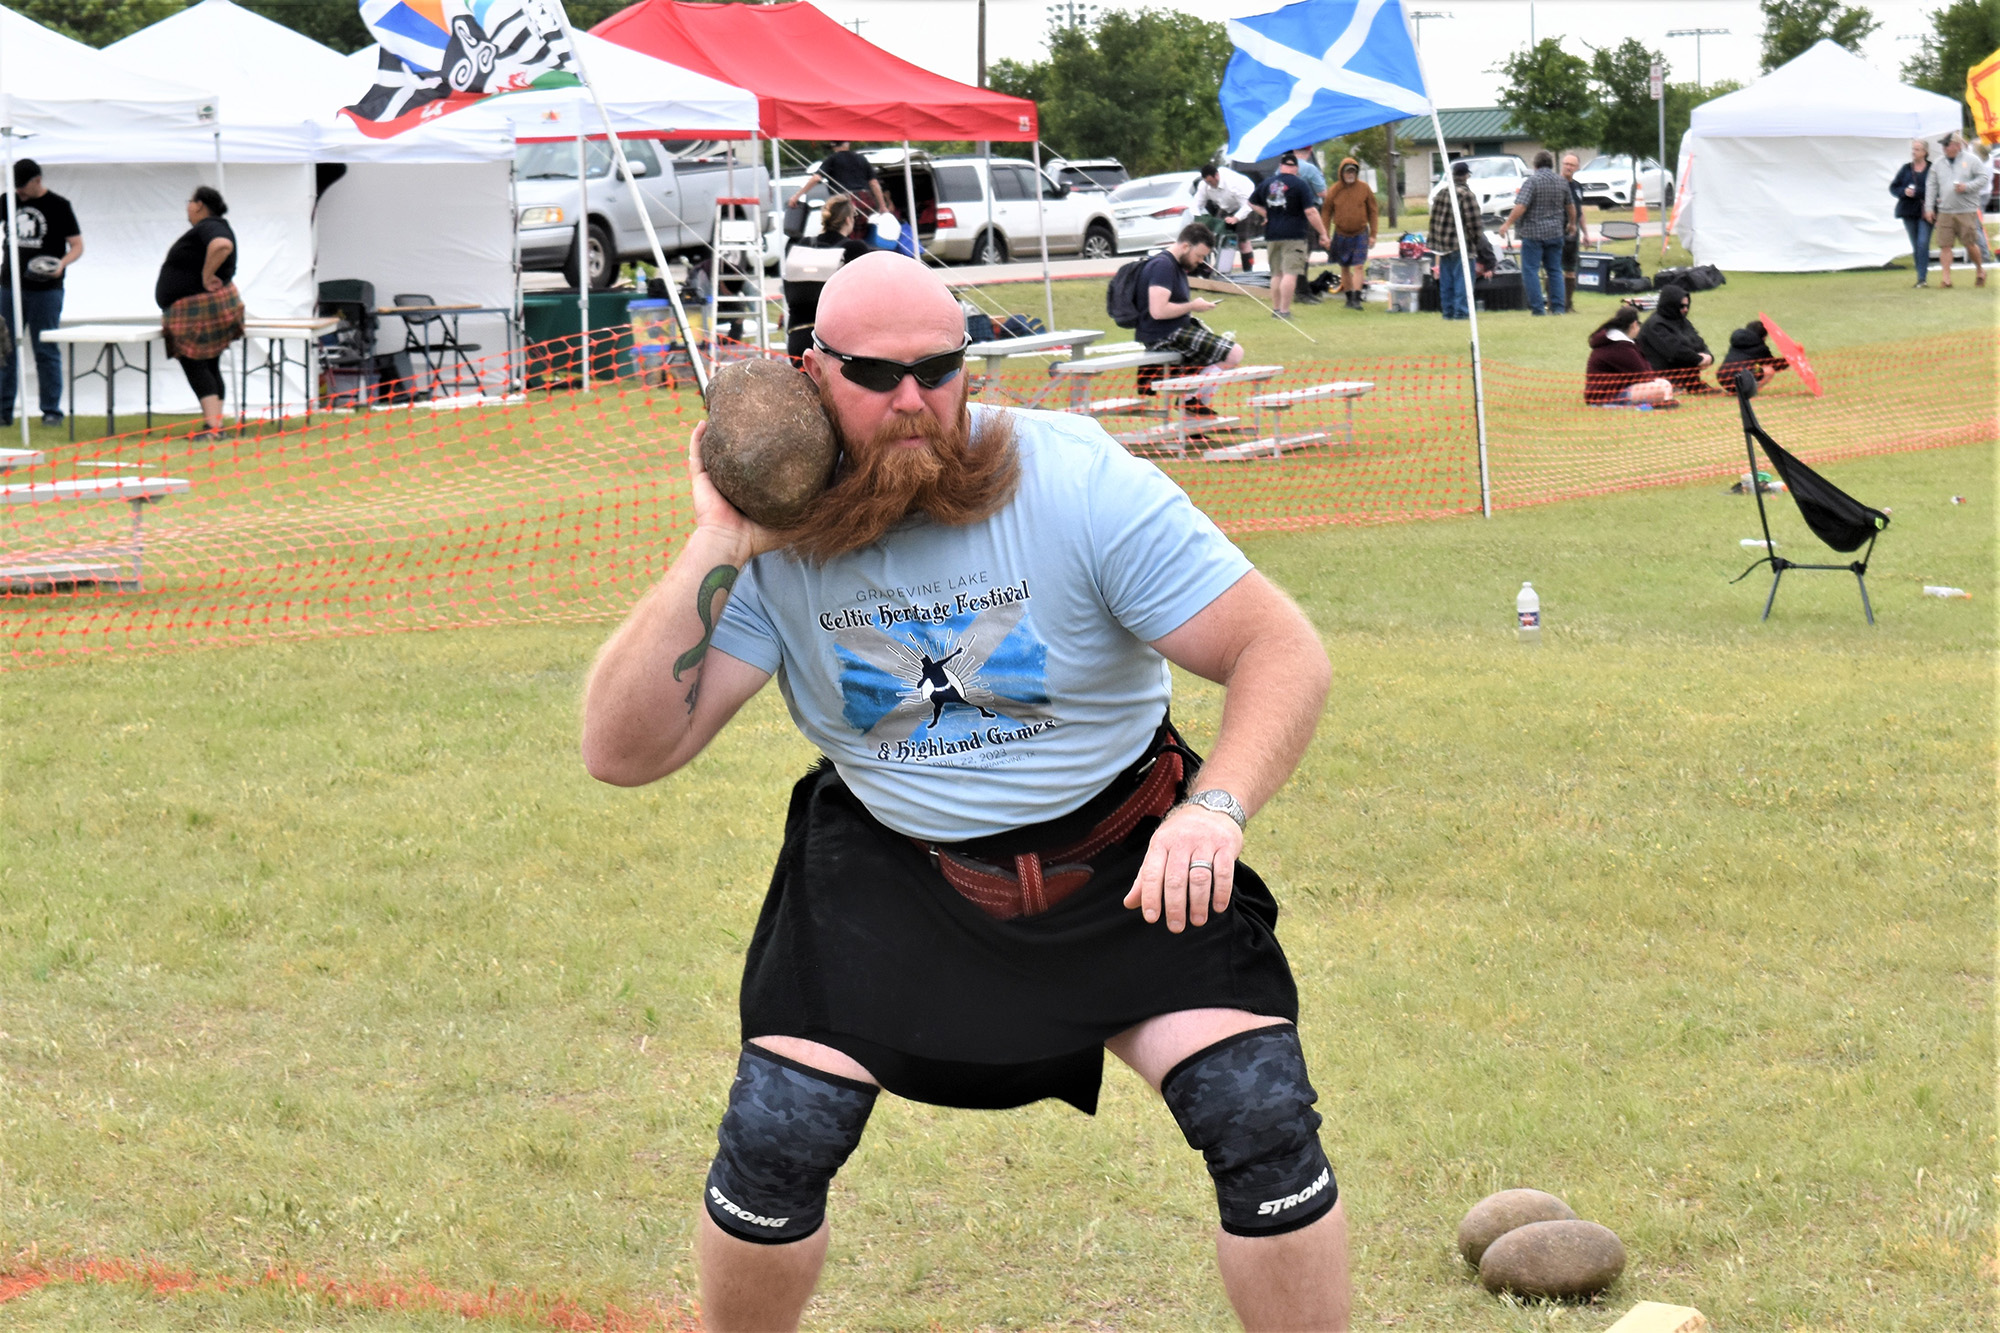 A man with a beard wearing a Celtic Heritage Festival T-shirt and kilt holds a shot put against his neck to prepare for a throw